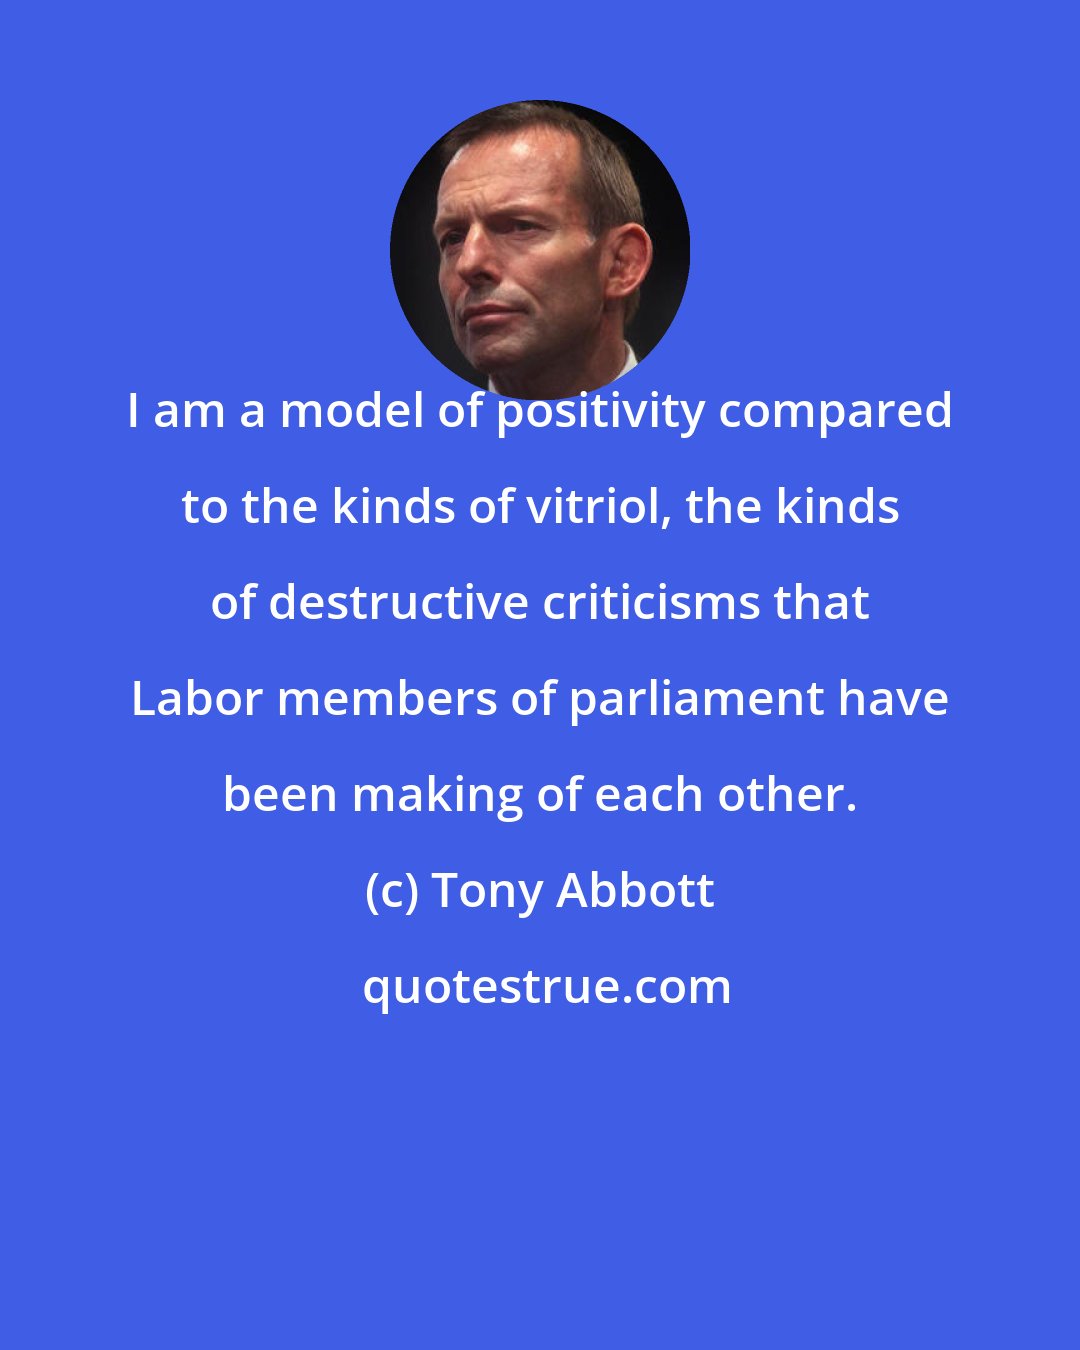 Tony Abbott: I am a model of positivity compared to the kinds of vitriol, the kinds of destructive criticisms that Labor members of parliament have been making of each other.